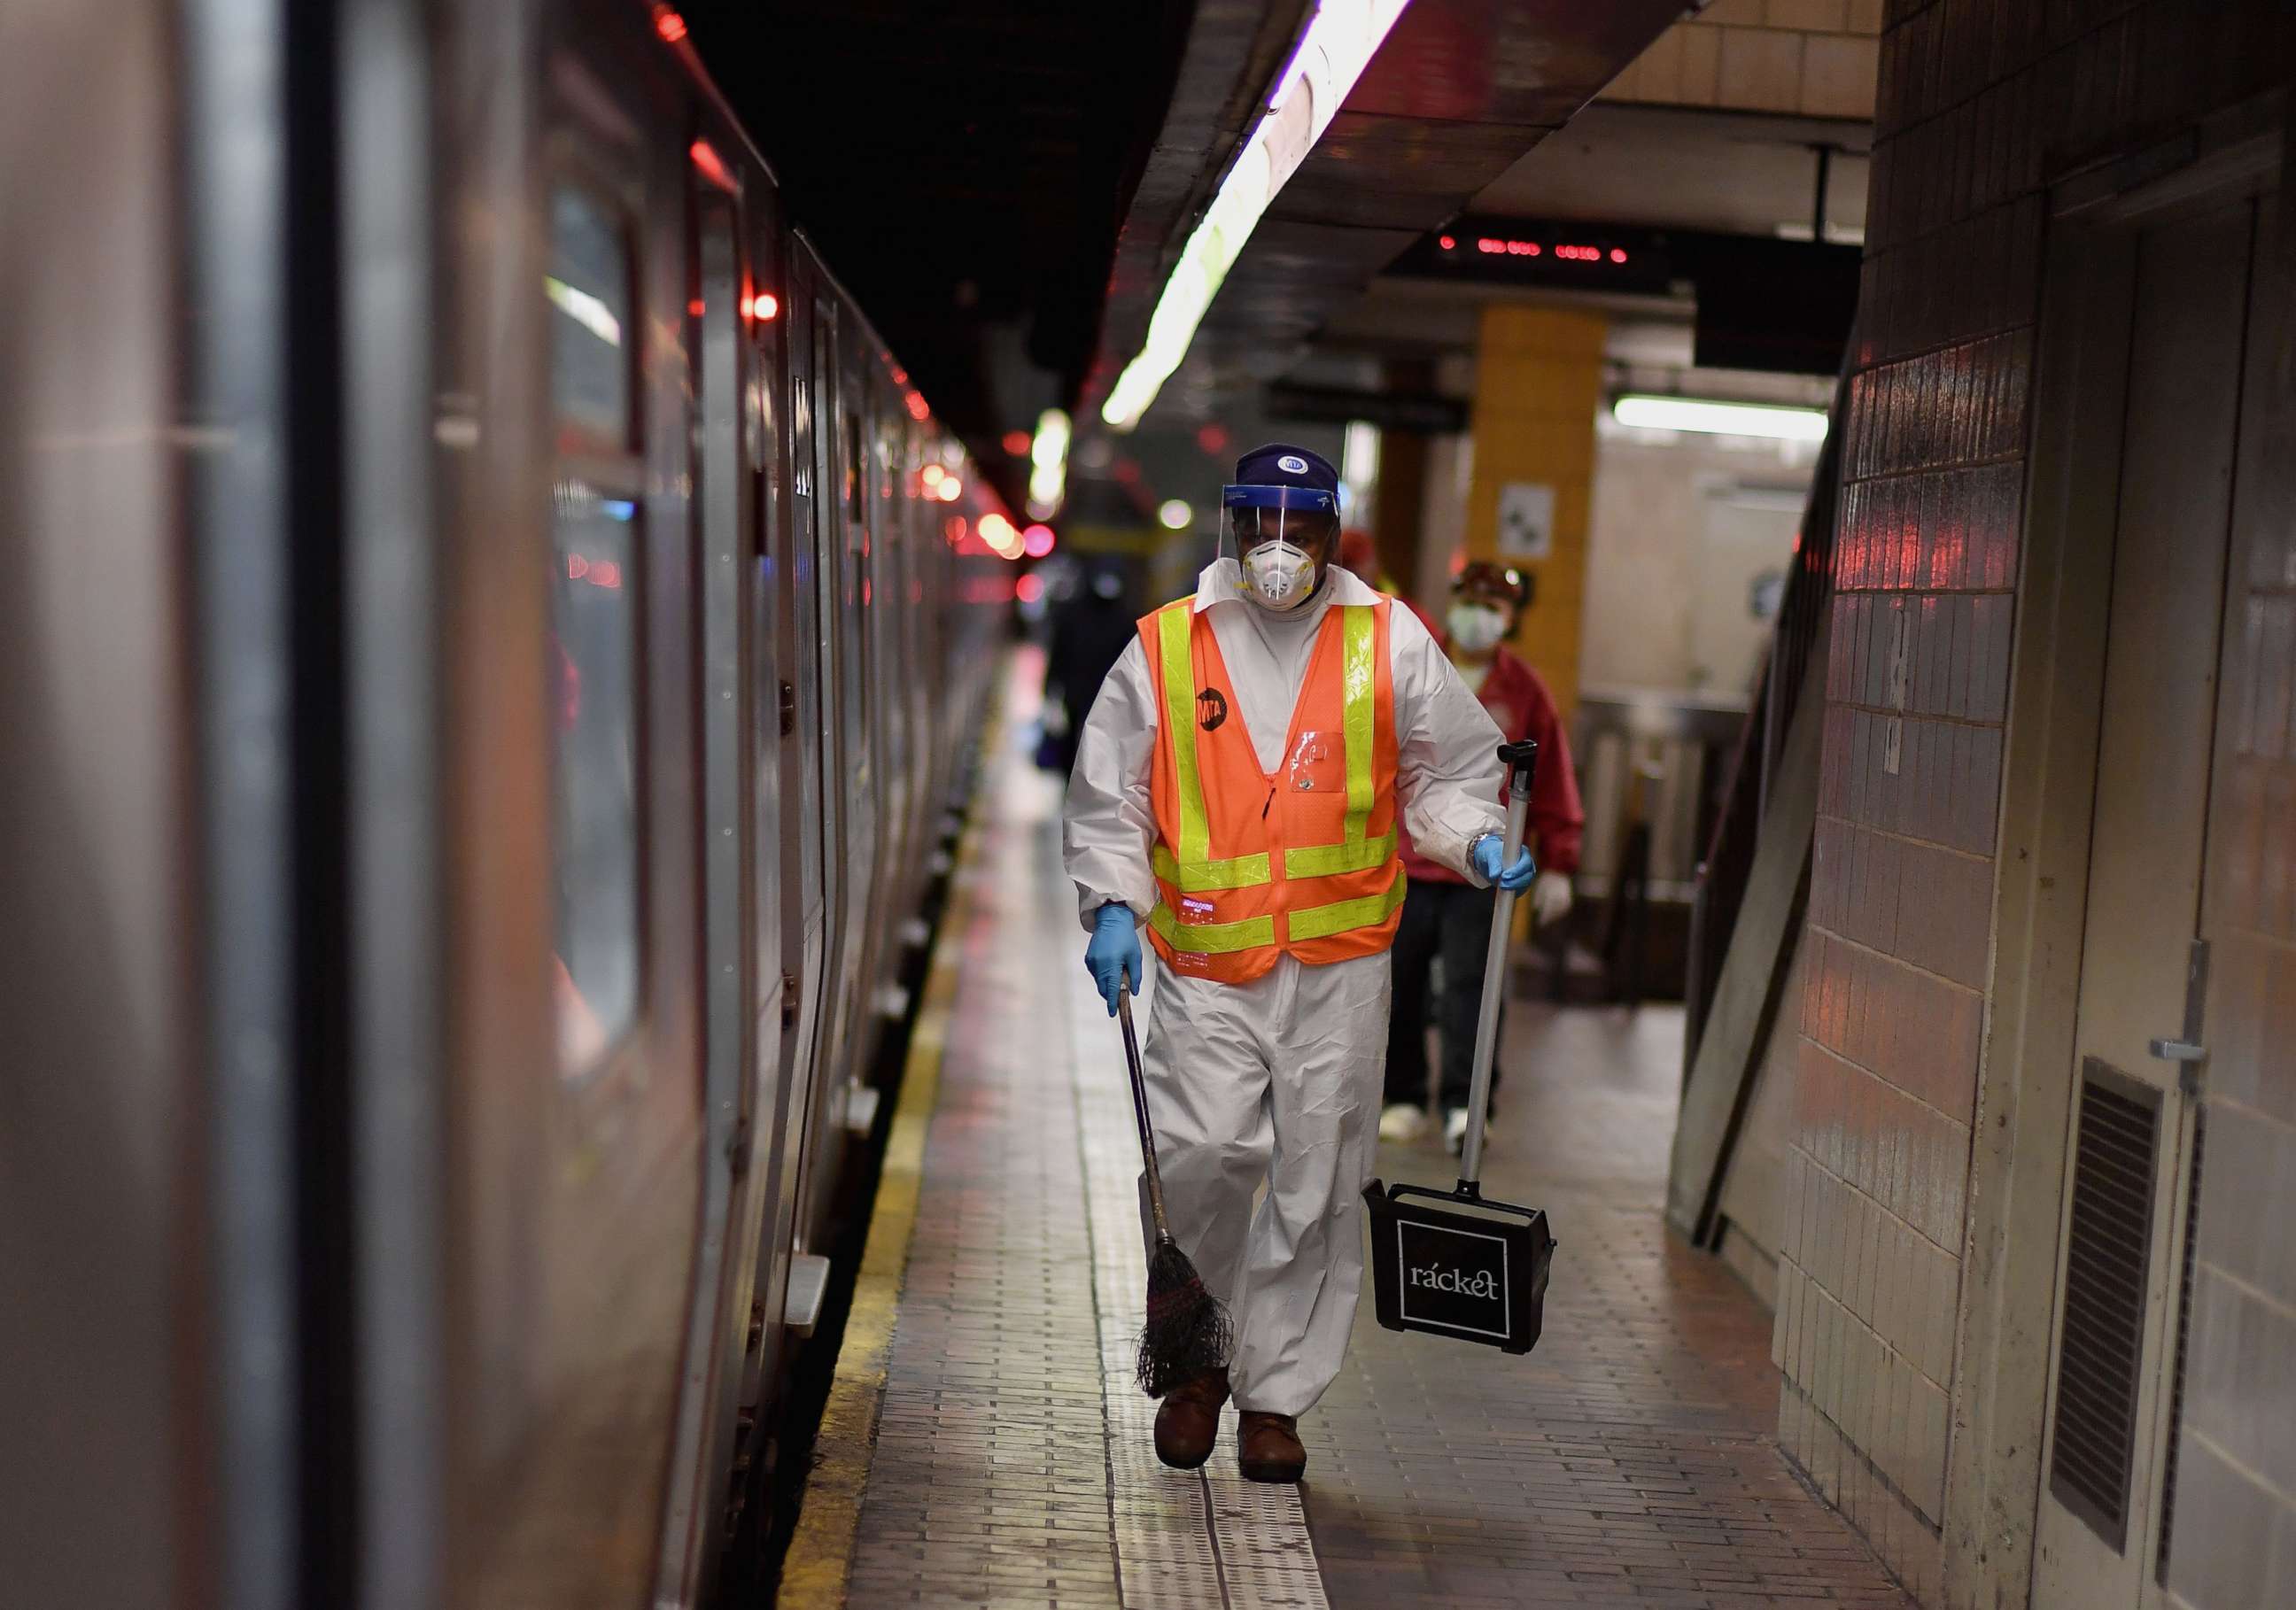 PHOTO: An MTA worker cleans subway trains at a station, May 7, 2020, in New York City.